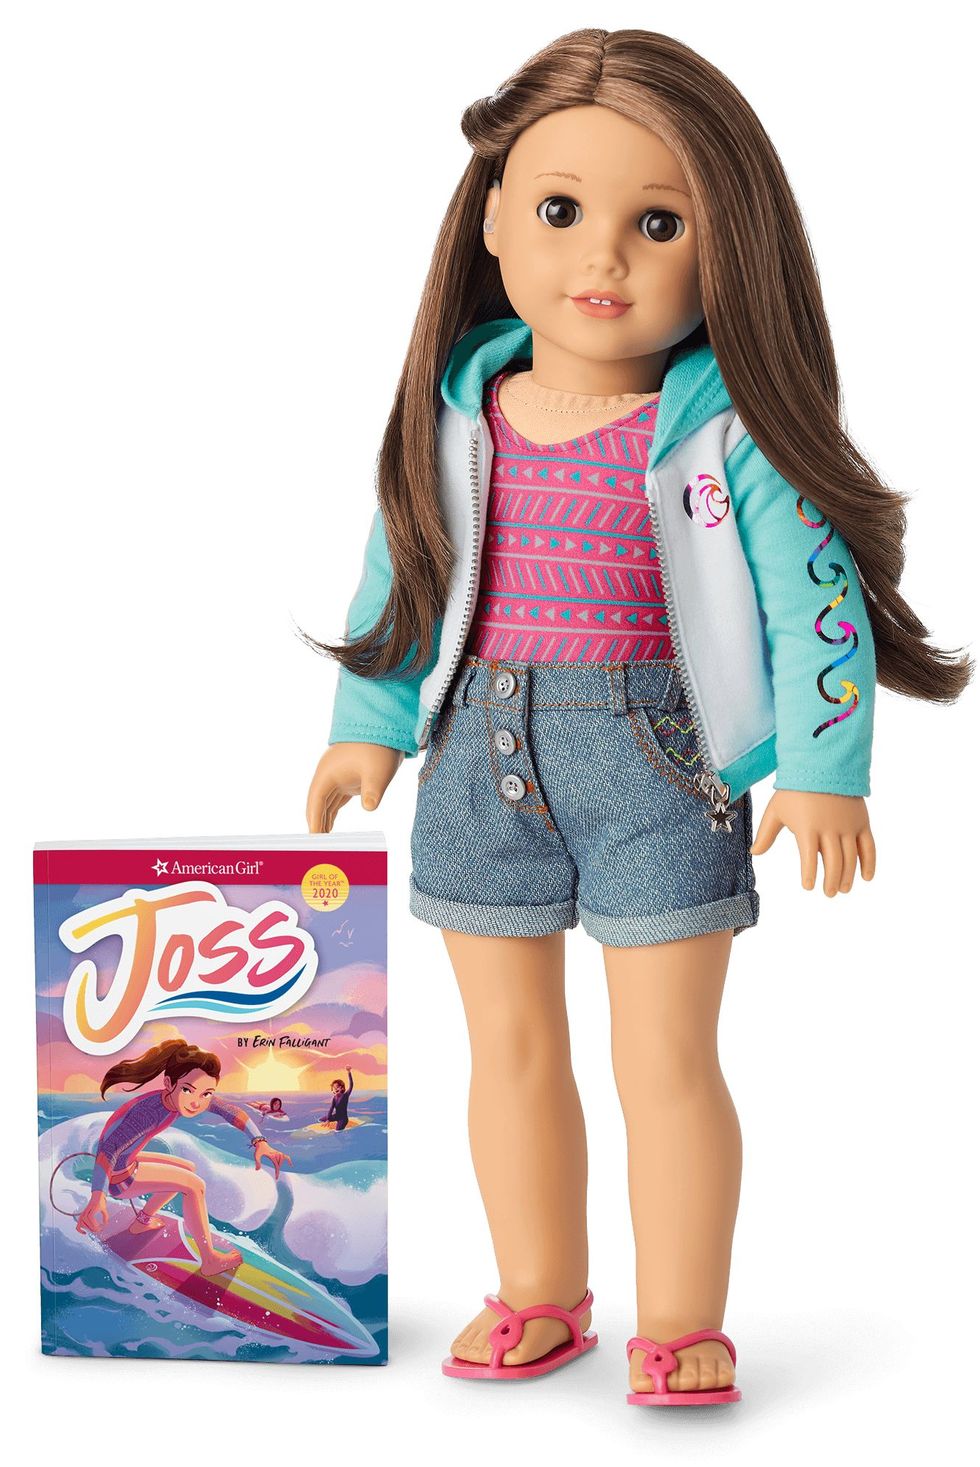 Inclusivity is a big part of American Girl's brand. 